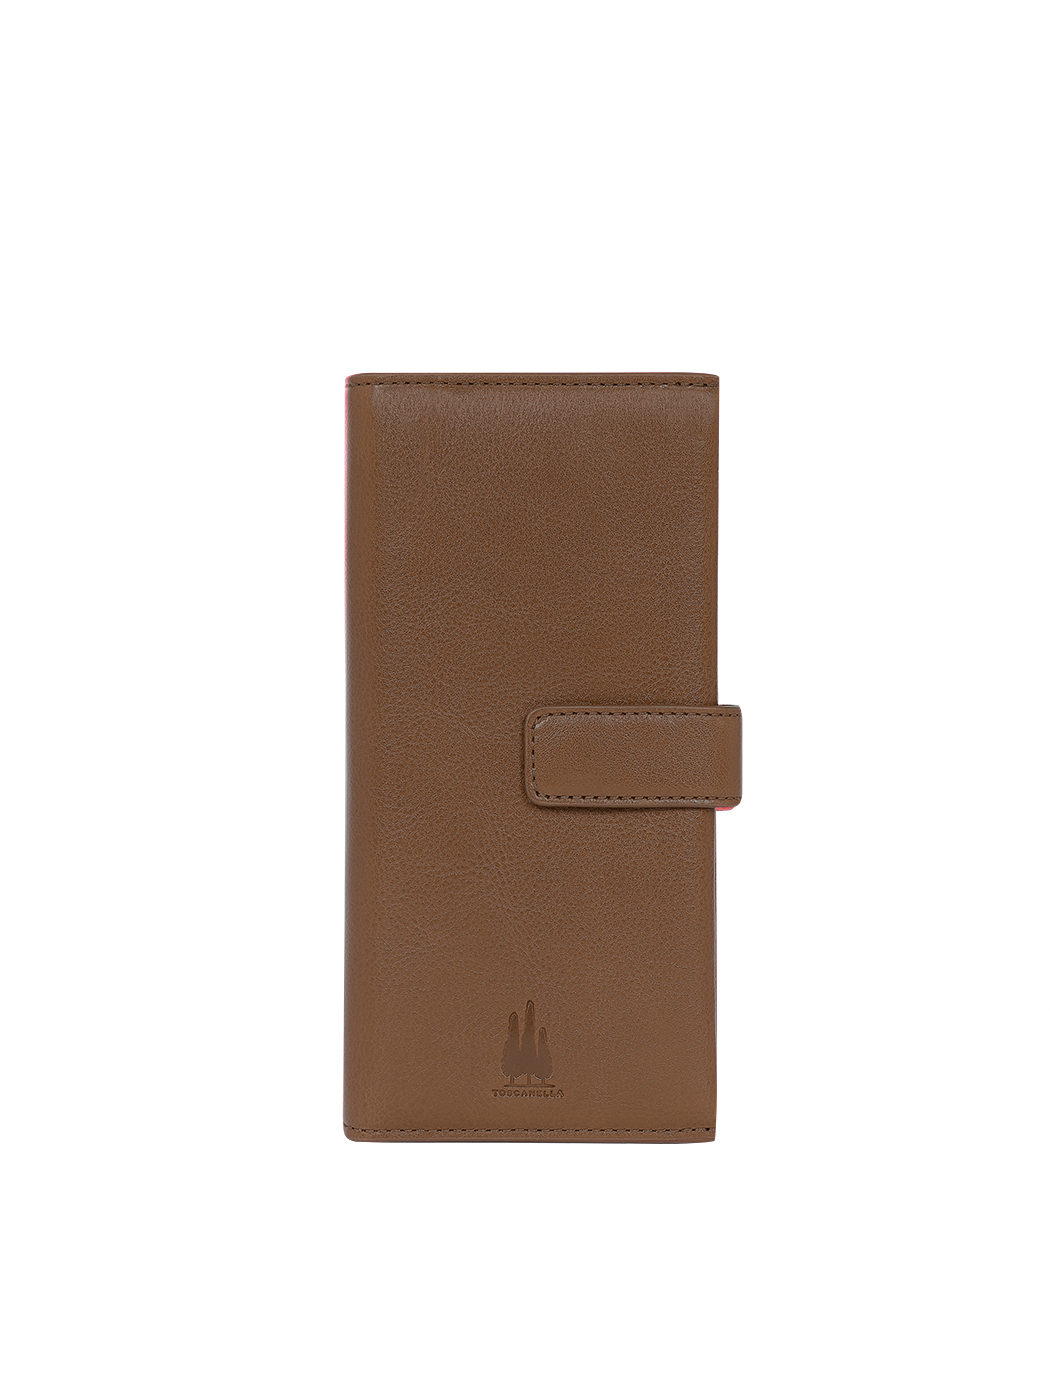 Long Wallet with Strap Dark brown